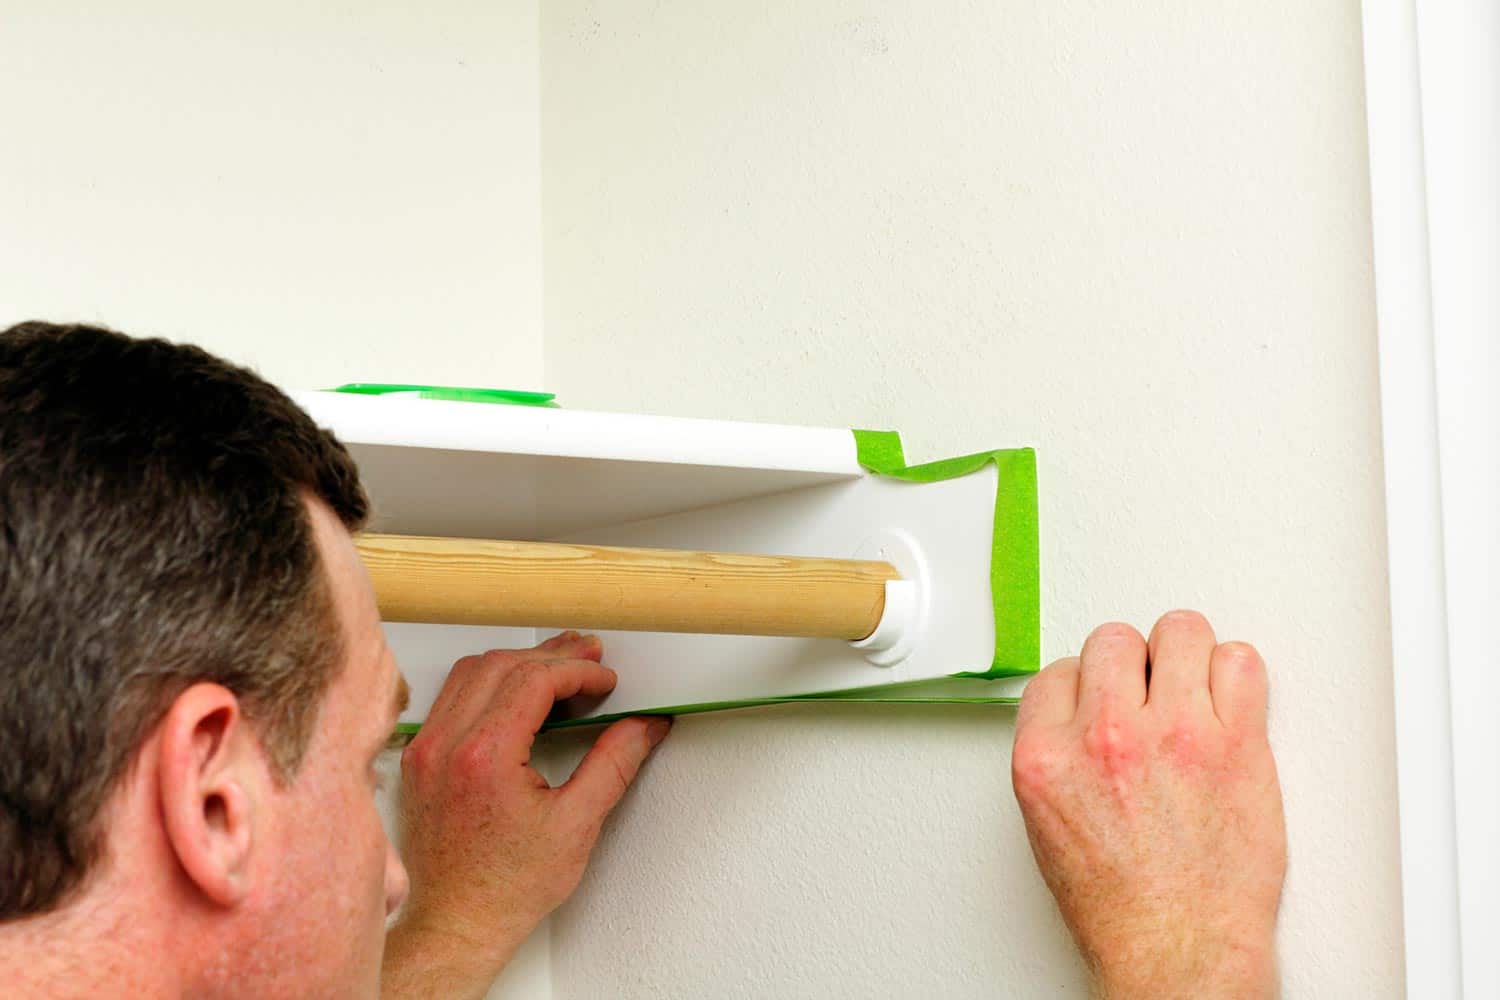 A man is preparing to paint the closet walls by putting on green painter's tape to the edges around a shelf